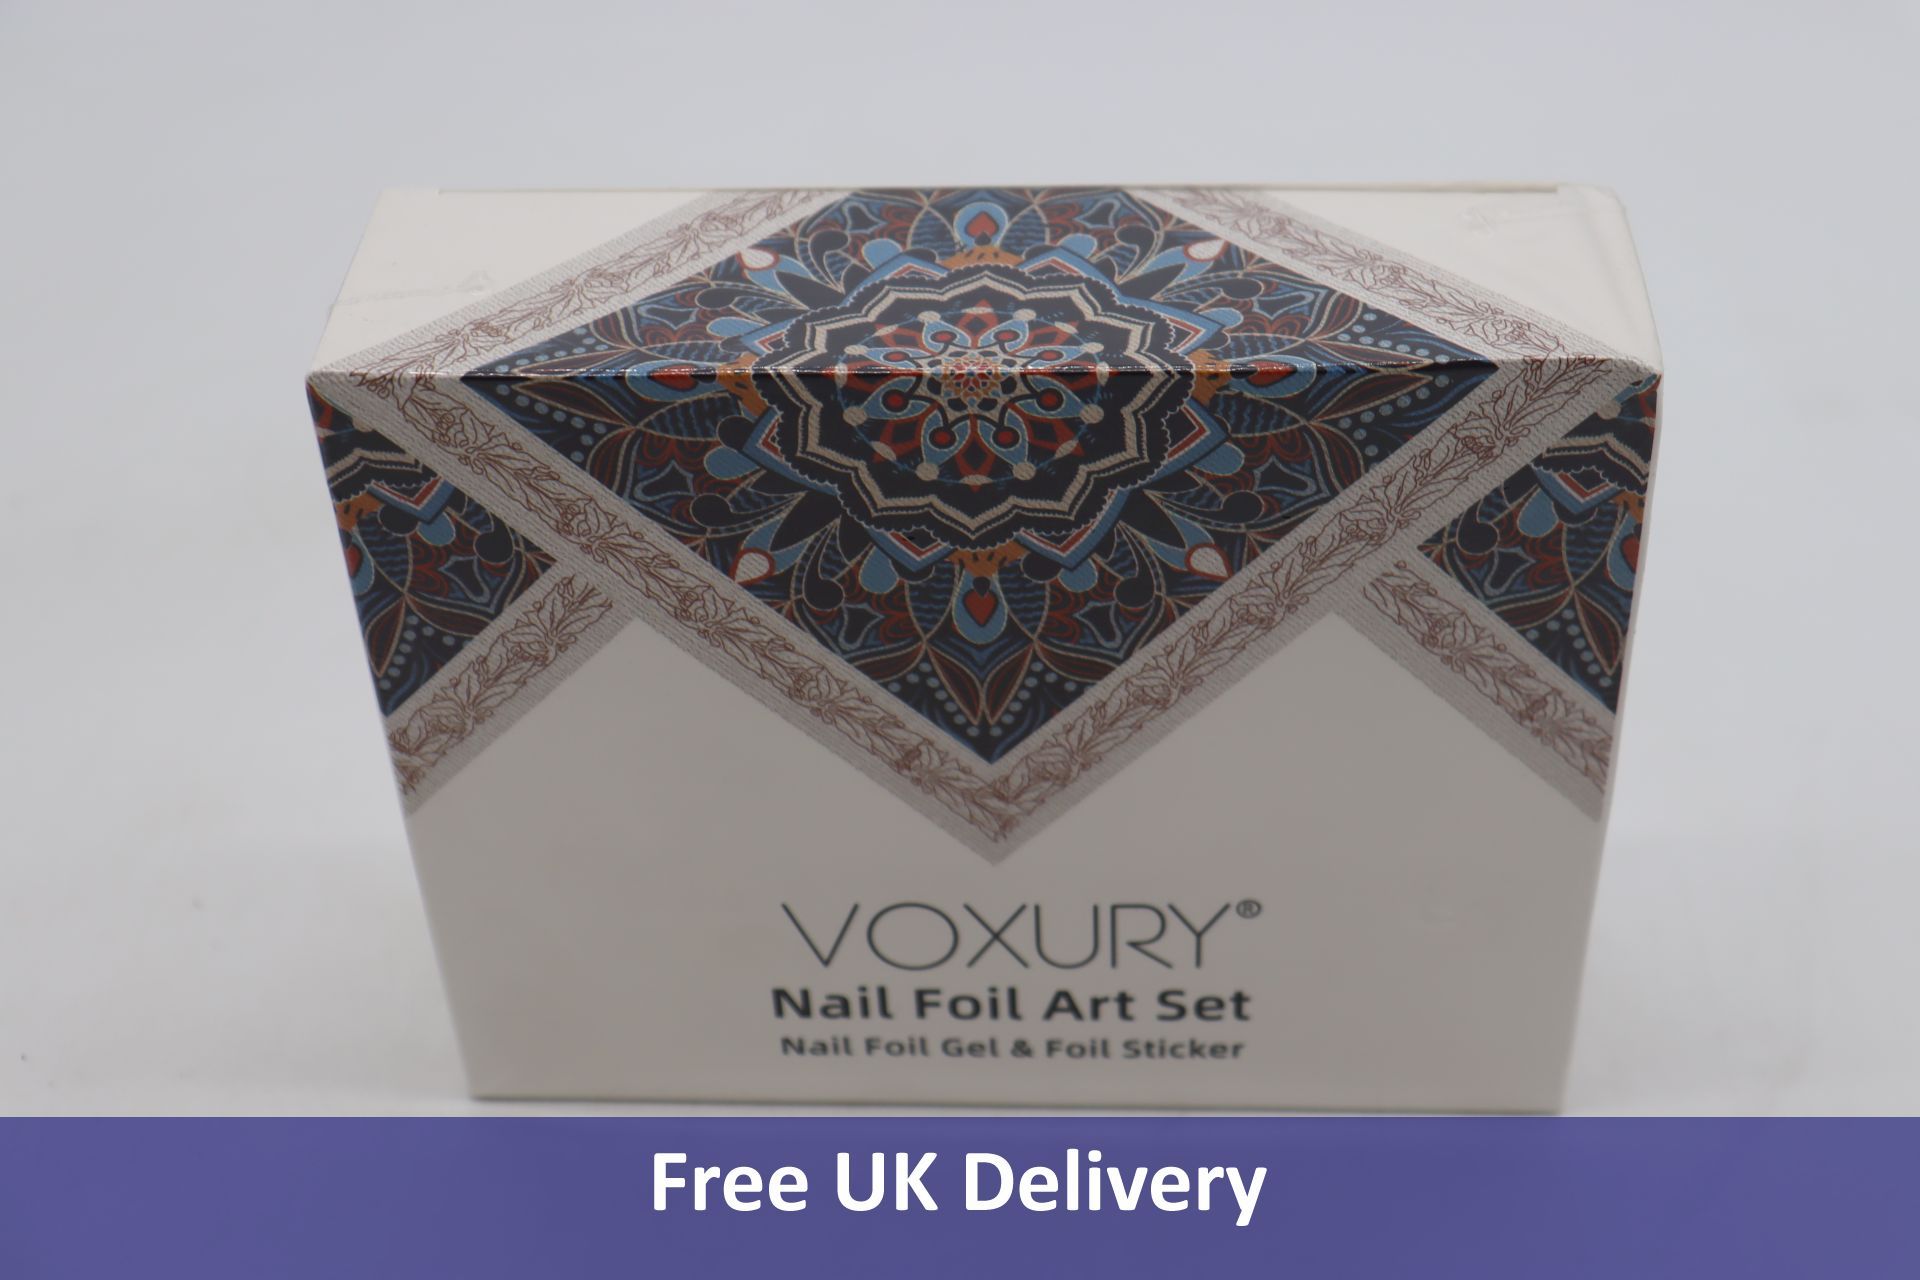 Fifty Voxury Nail Foil Art Sets including 2x 15ml Nail Foil Glue, 20x Nail Stickers each